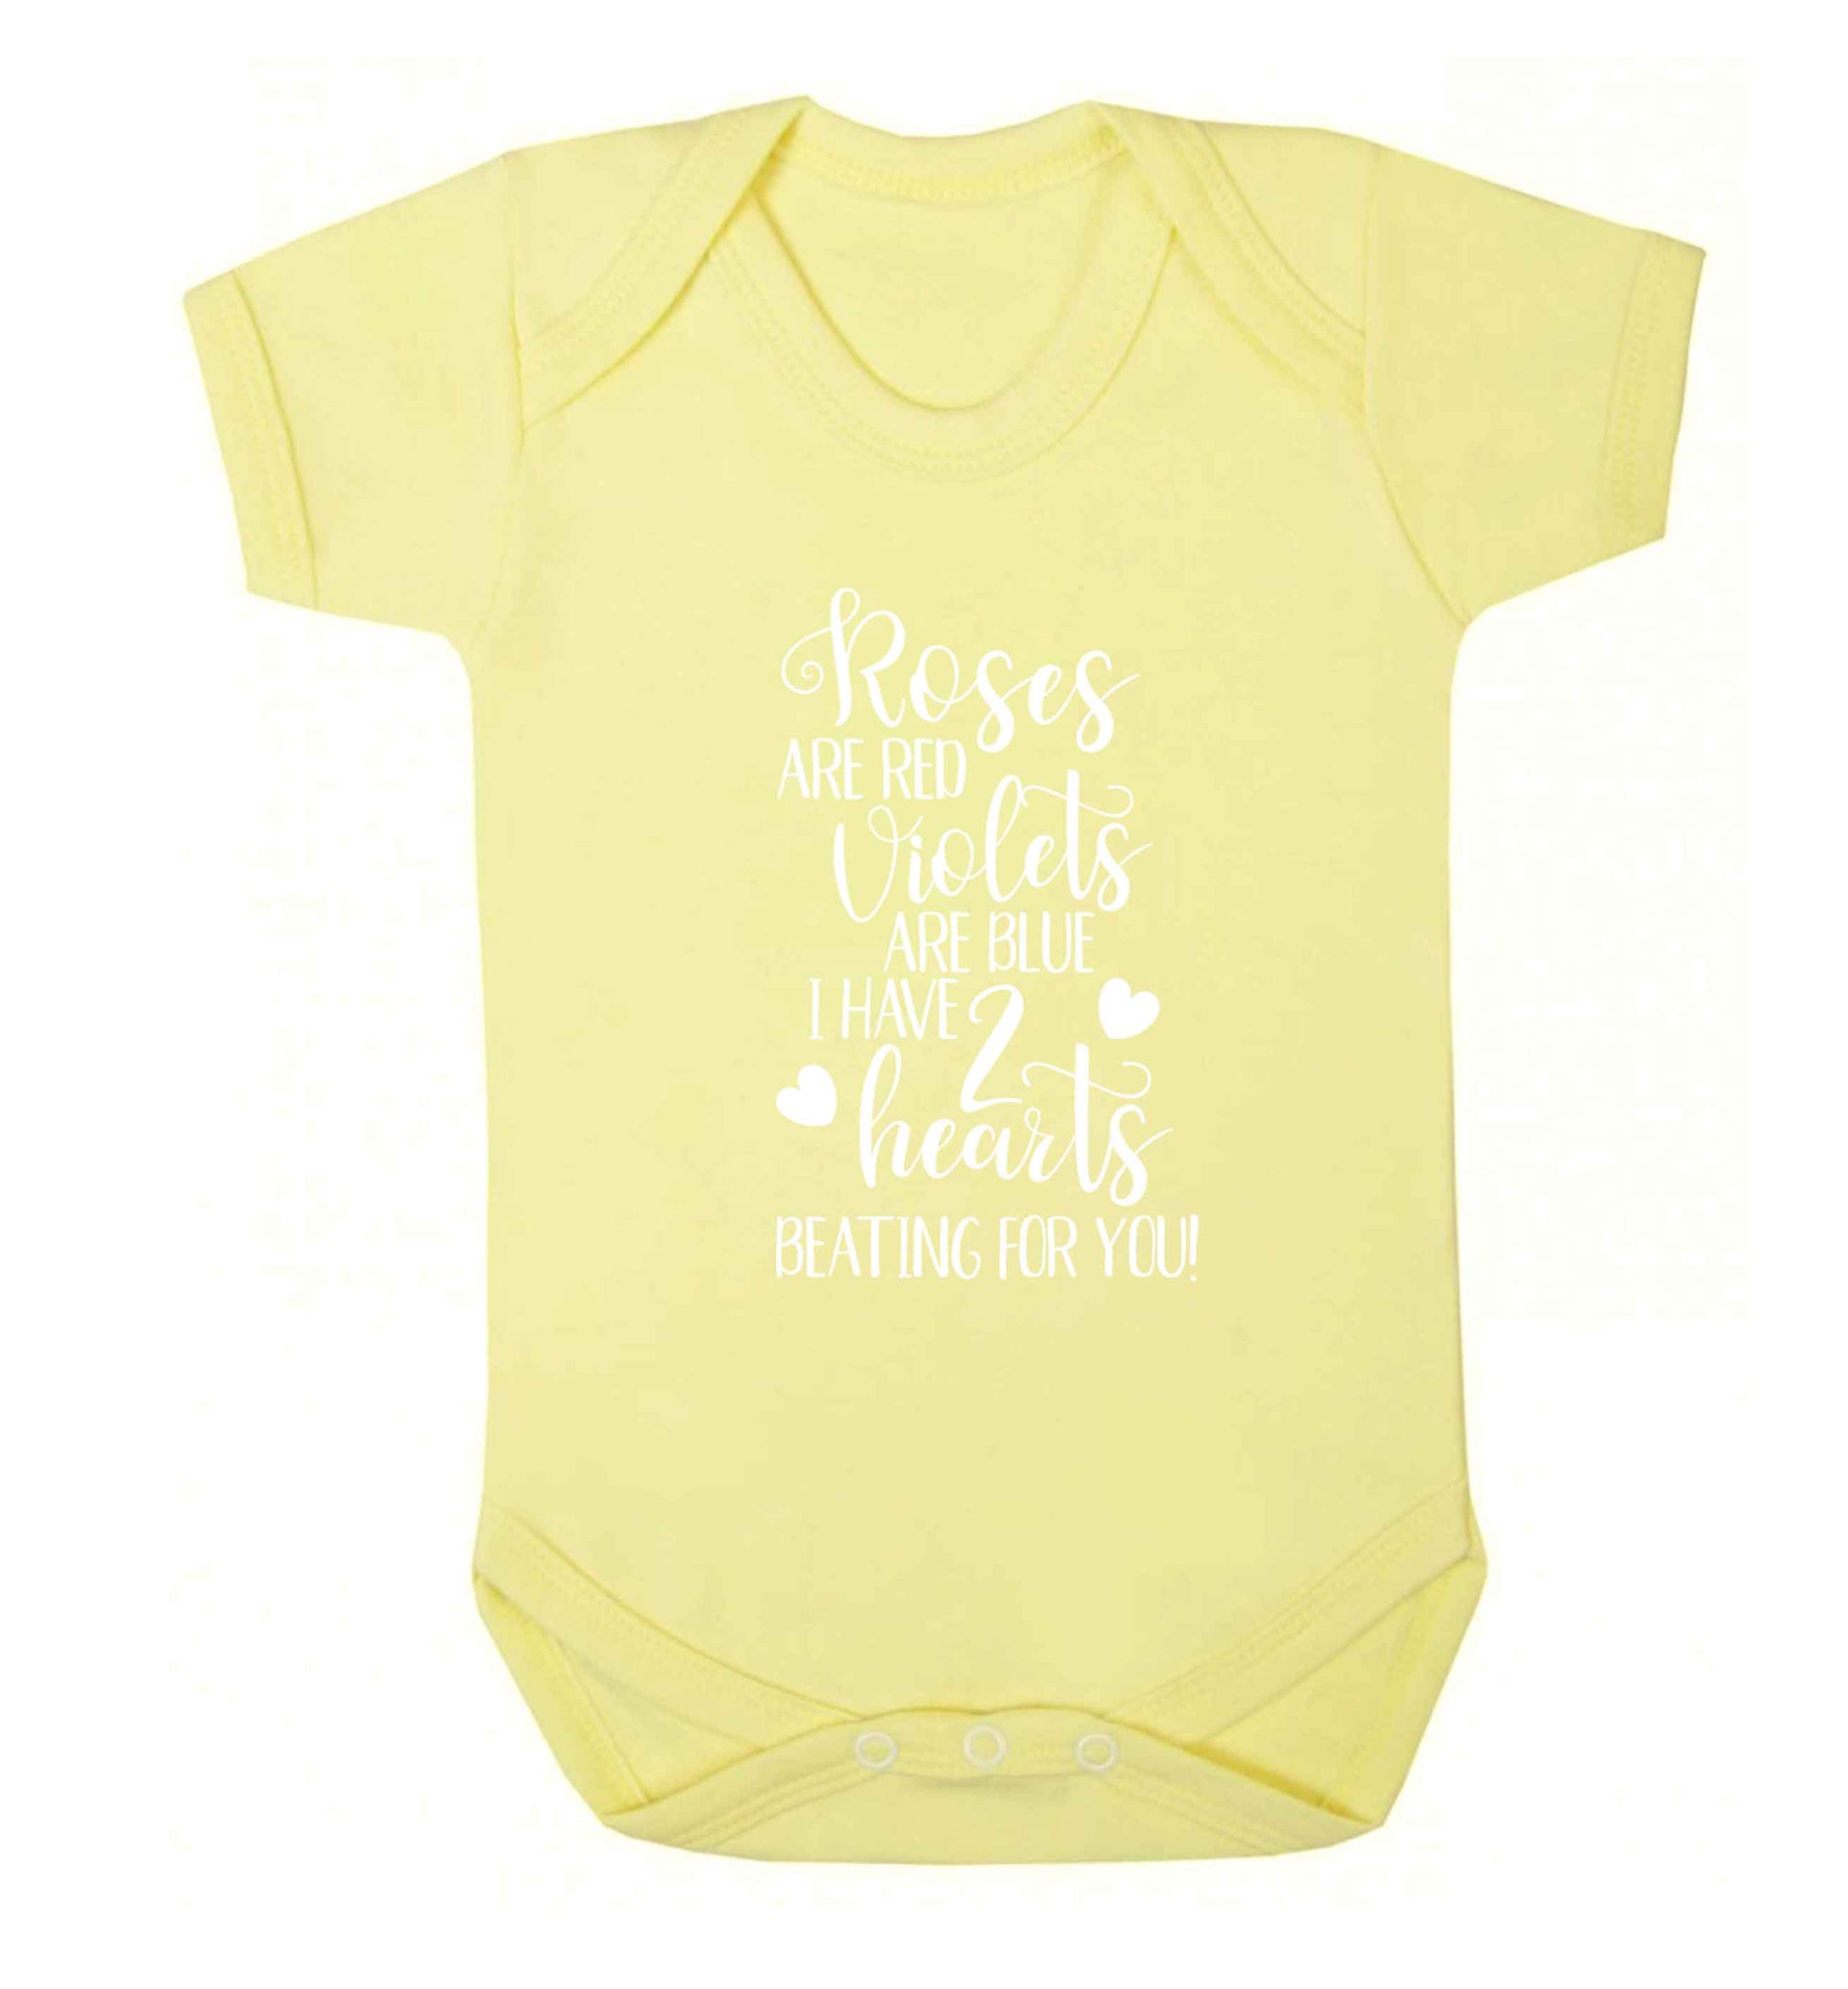 Roses are red violets are blue I have two hearts beating for you Baby Vest pale yellow 18-24 months